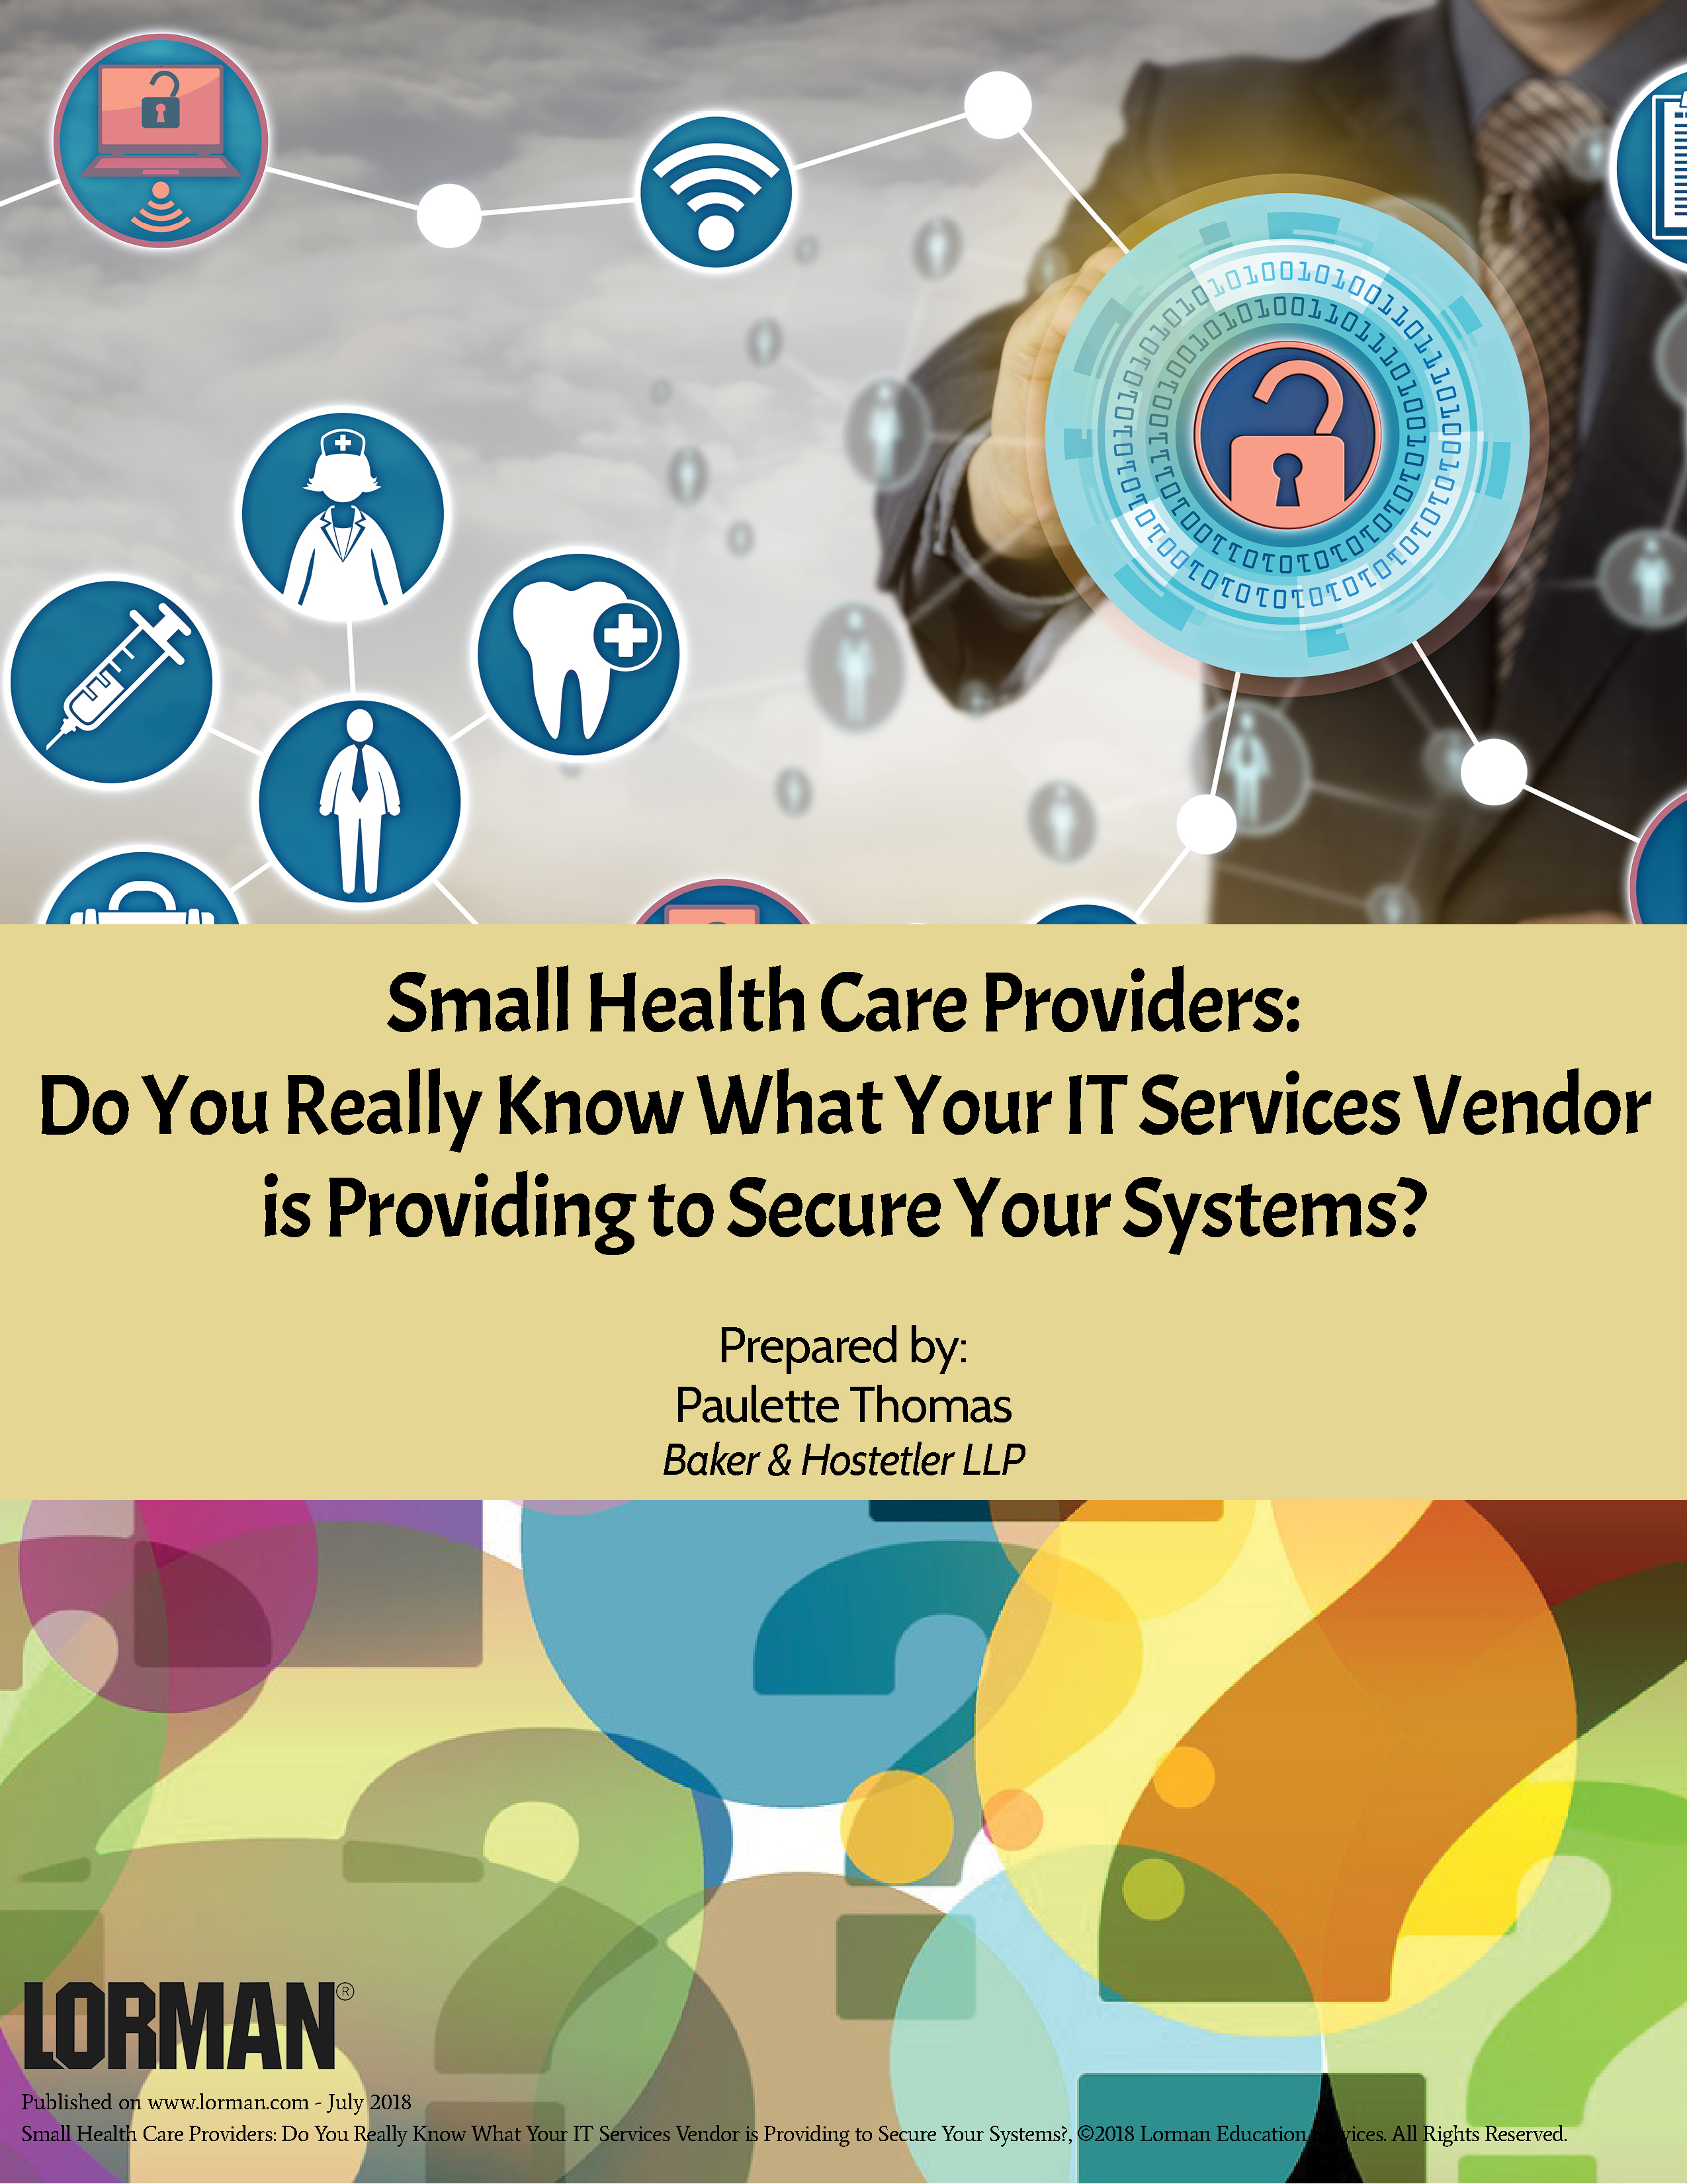 Health Care Providers: Do You Know What Your IT Services Vendor is Providing to Secure Your Systems?